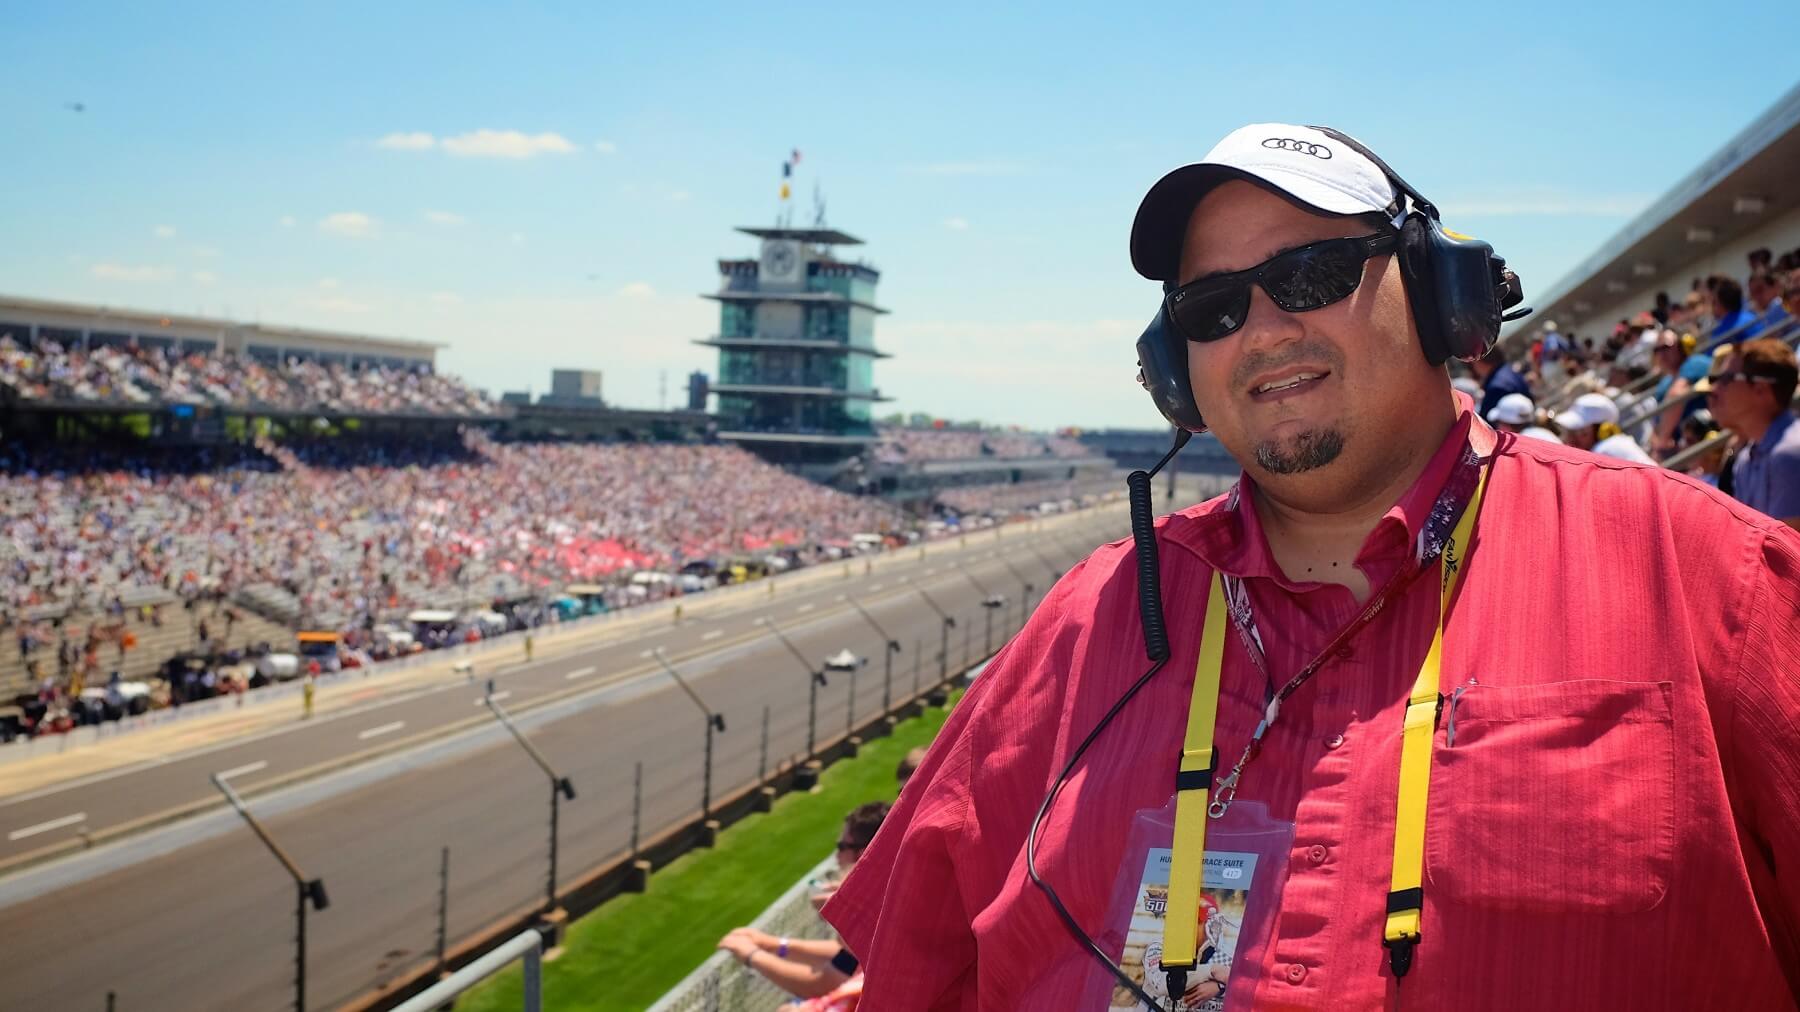 Our incredibly generous friend, Chris Lema, who helped us check off our Indy 500 bucket list item in epic fashion!